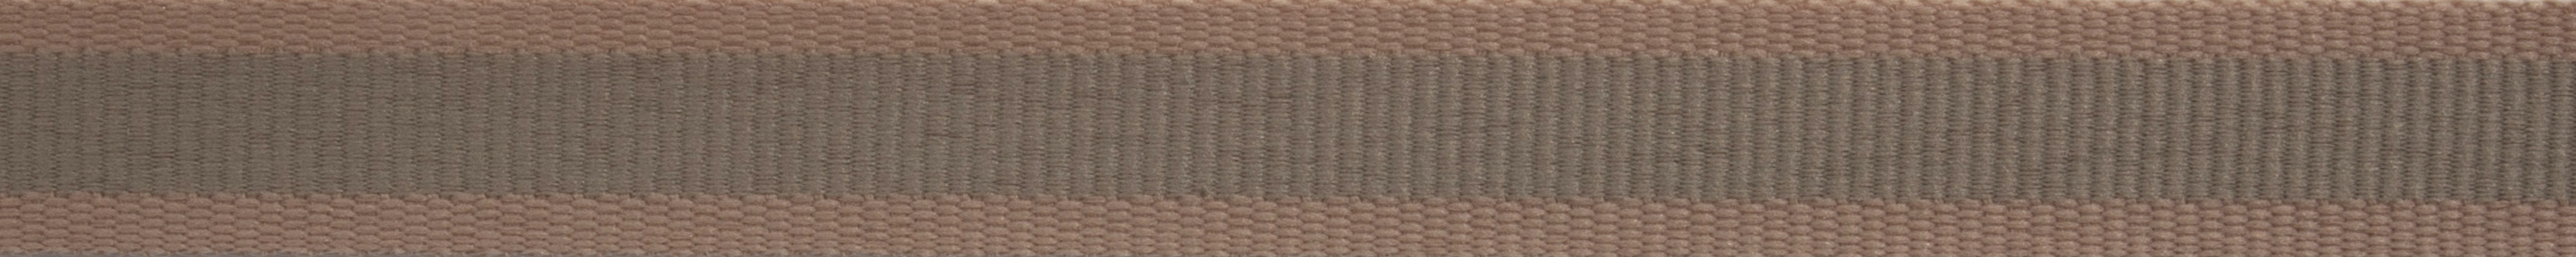 Picture of Ribbon: Oatmeal Stripe: 4m x 15mm: Cloudy